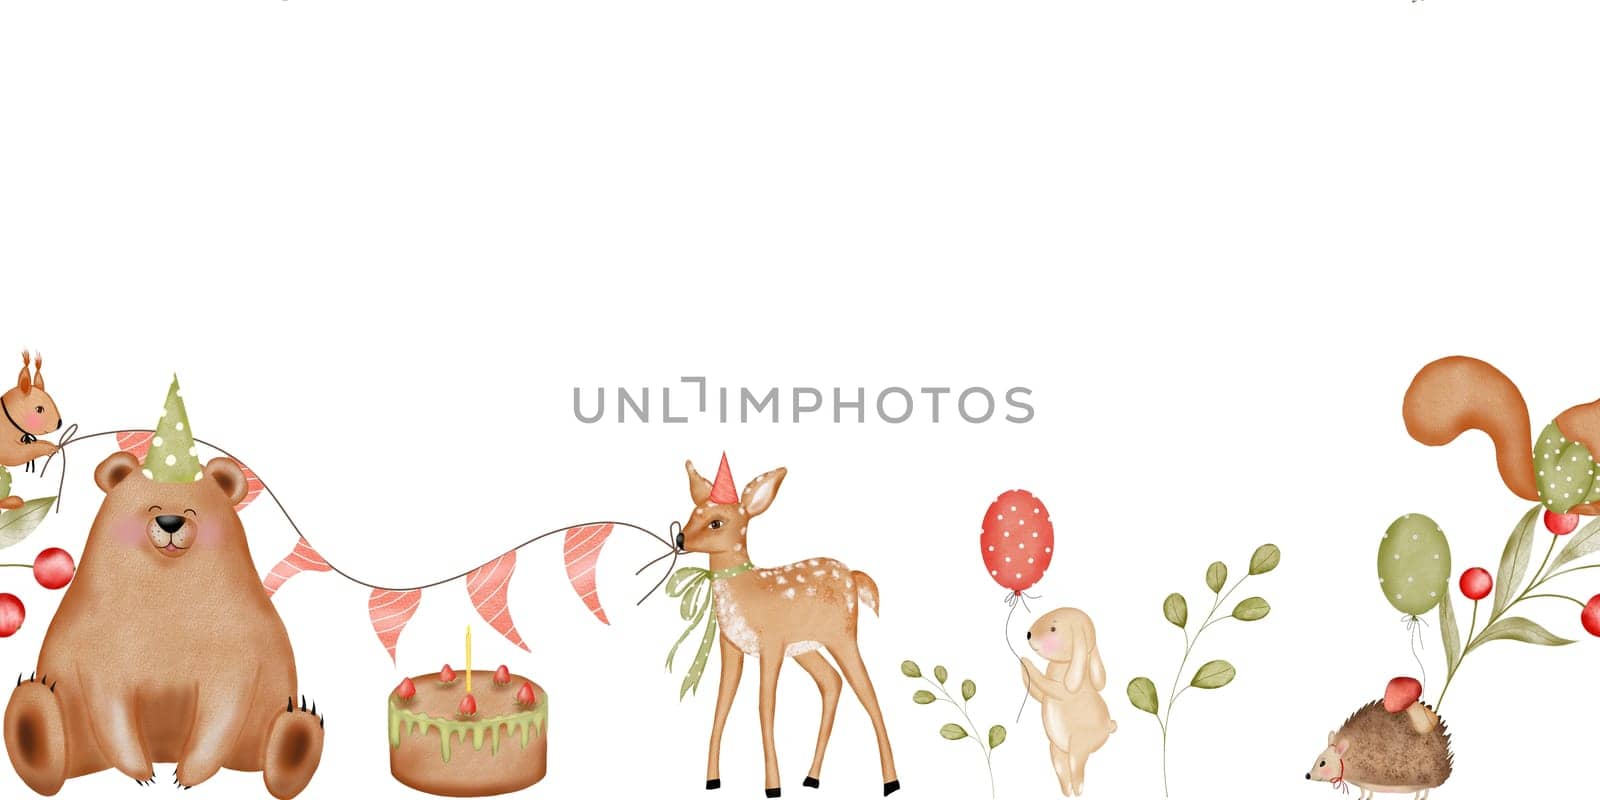 Watercolor illustration isolated seamless border with cute forest animals bear, fawn, squirrel, hare, hedgehog and birthday cake. Birthday theme pattern. Fabric edge. For the design of banners and cards